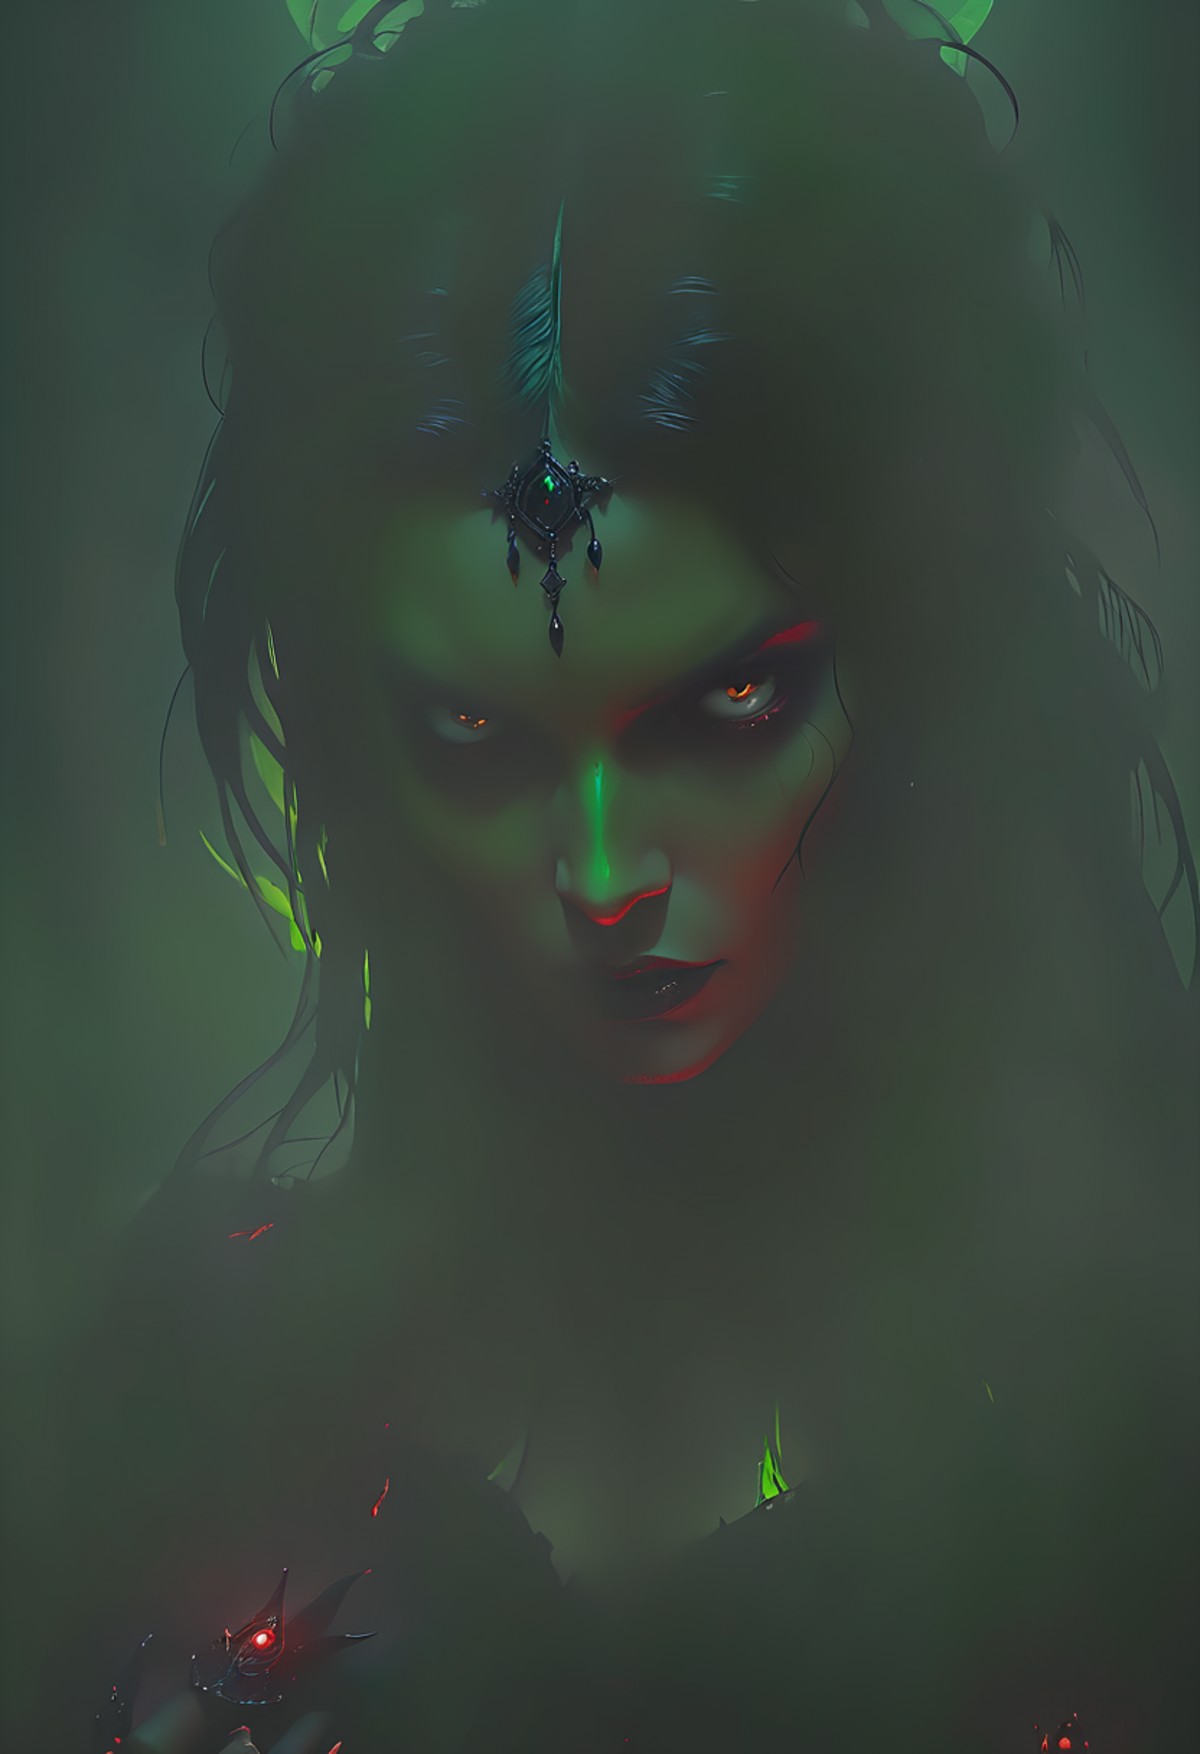 Gothic style demonic woman, dark fantasy, angelic, black angel, light green, saturated colors, moody, red, by Greg Rutkows...